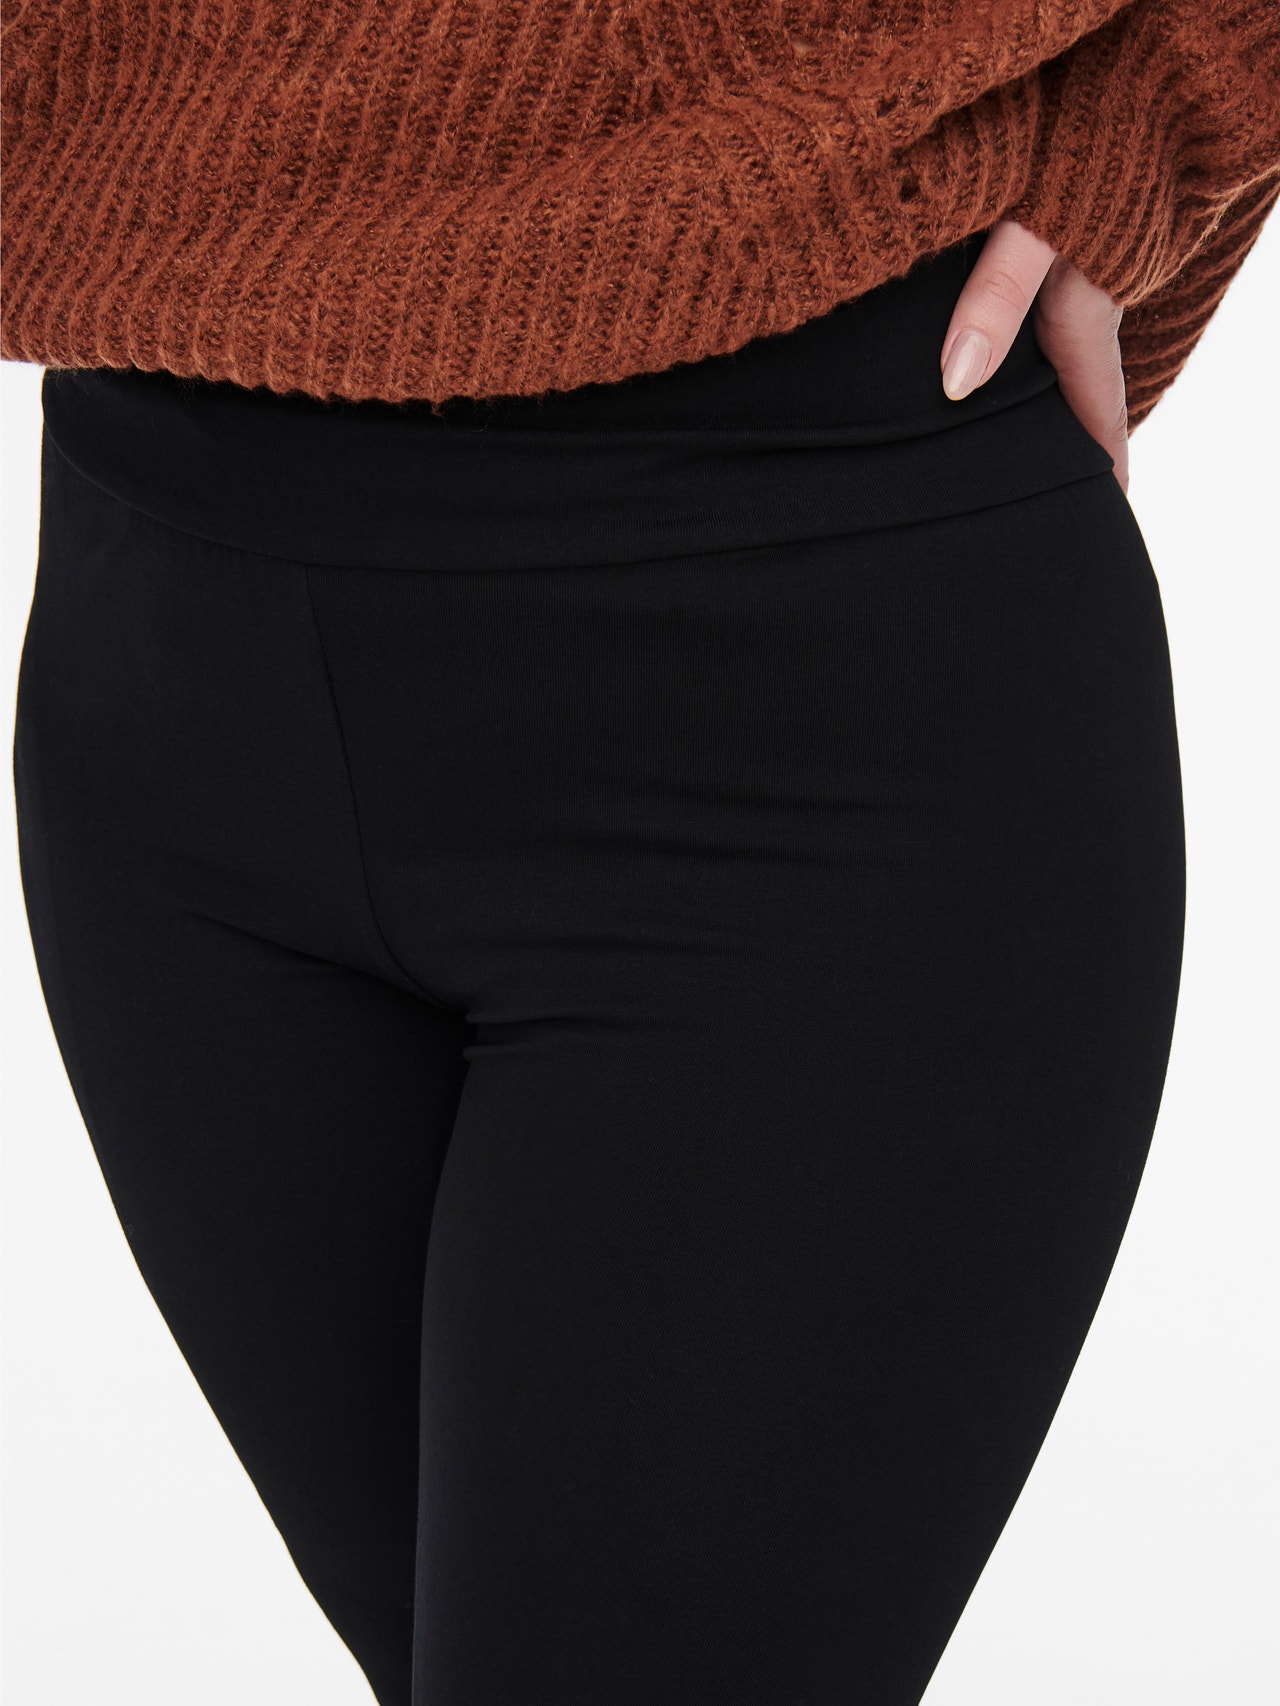 ONLY Slim Fit Hohe Taille Leggings -Black - 15246800